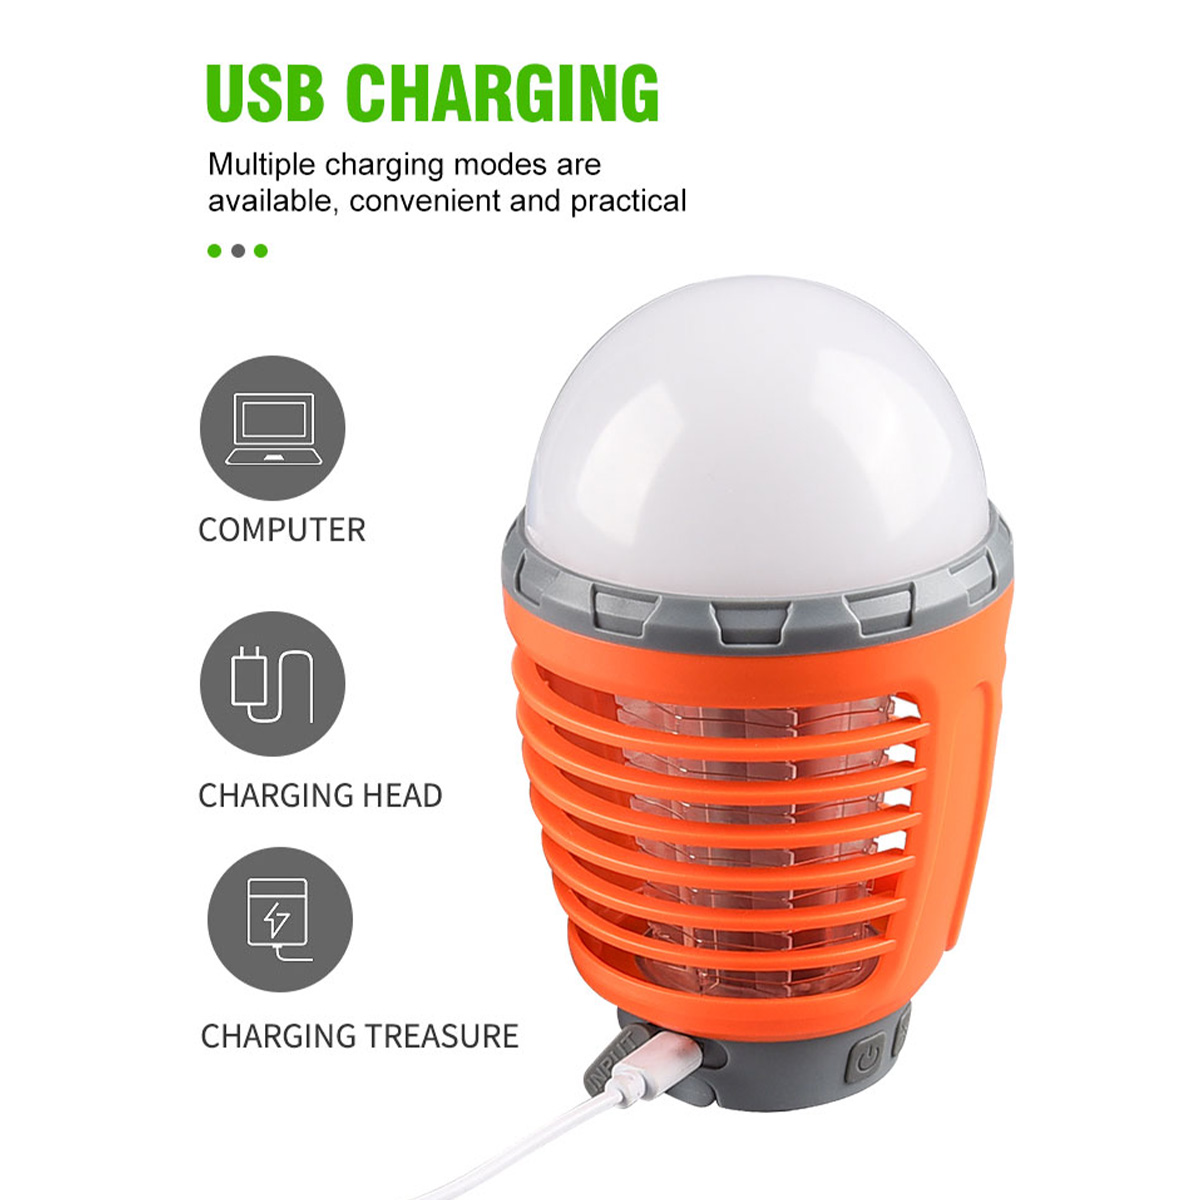 70-Lumens-2-in-1-LED-Zapper-Light-Bulbs-Mosquito-Killer-Lamp-4-Modes-USB-Rechargeable-Hook-Hanging-C-1727489-5